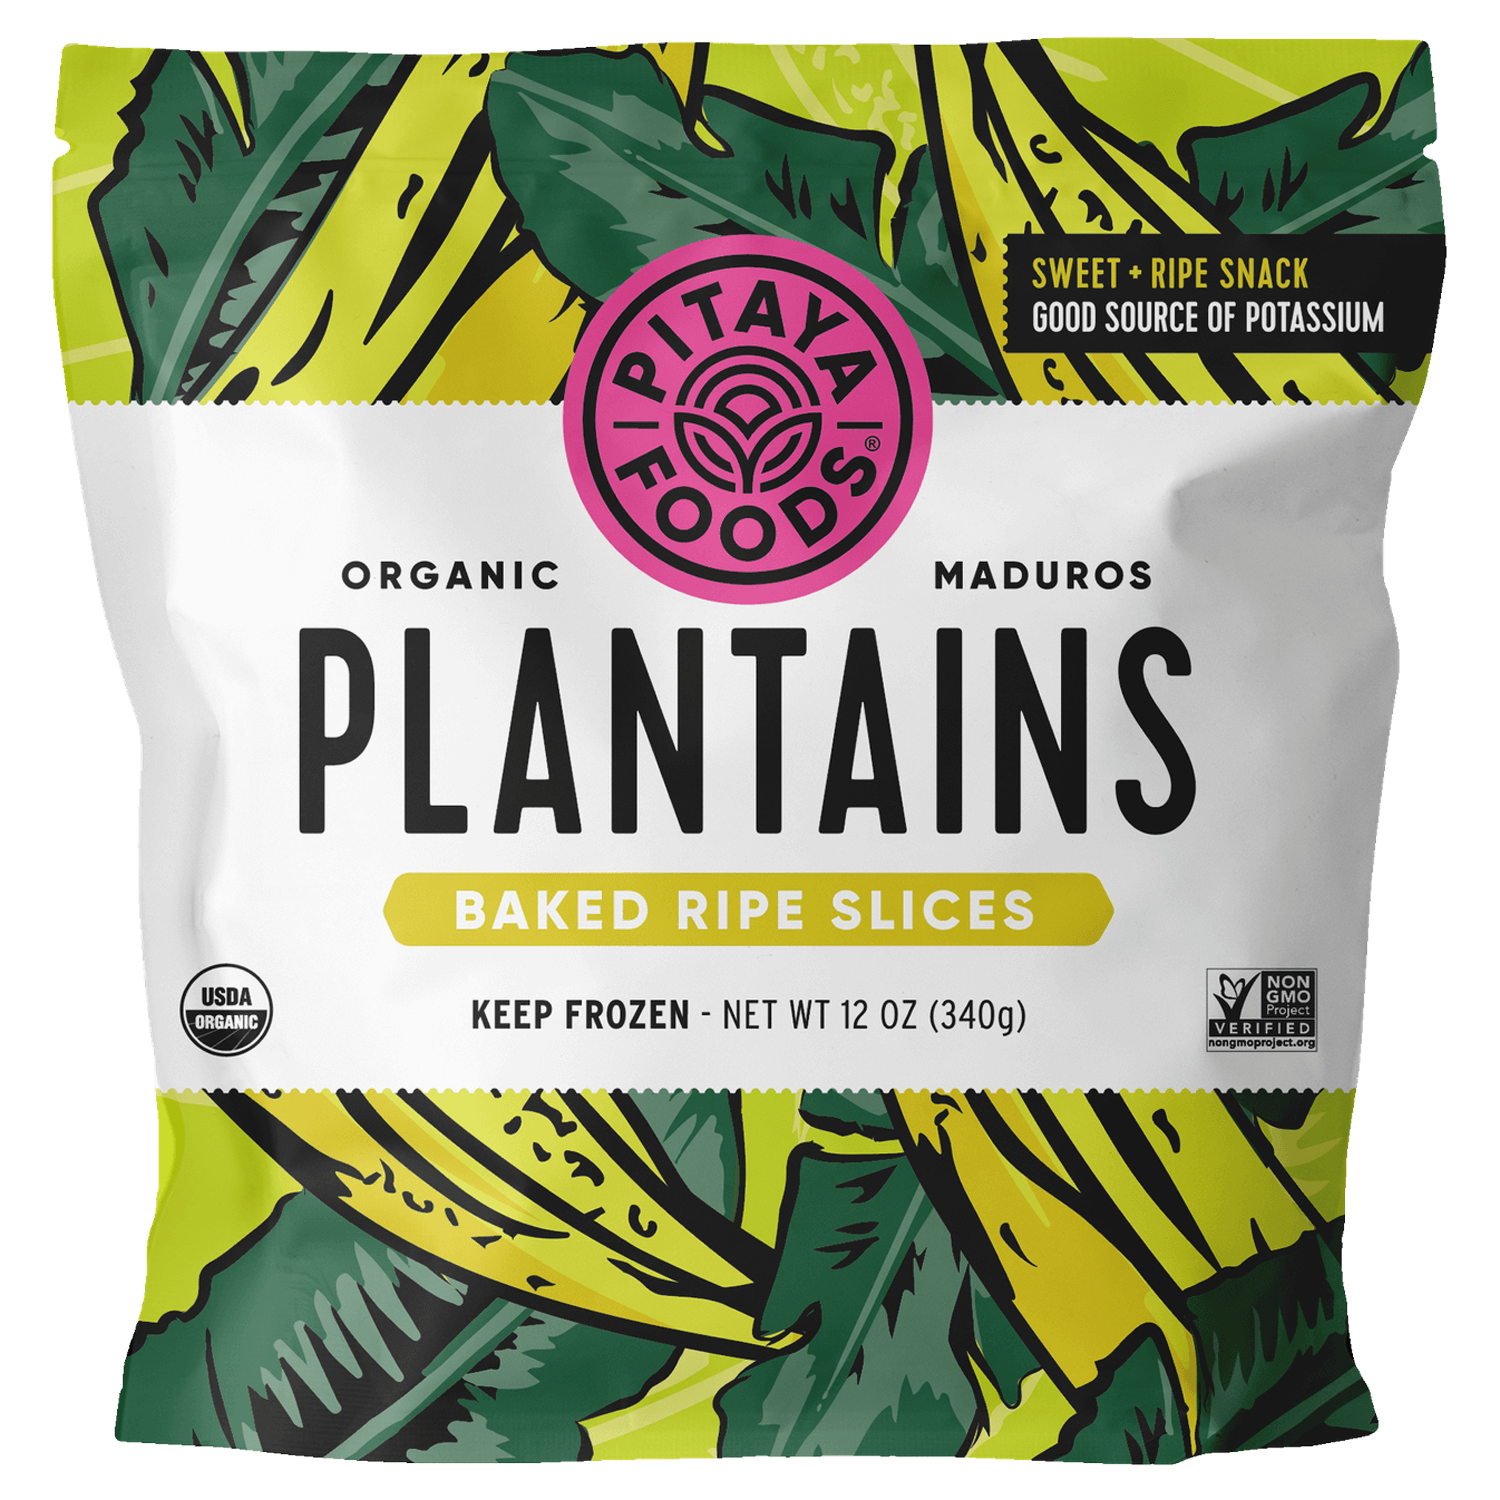 Organic Plantains Baked Ripe Slices